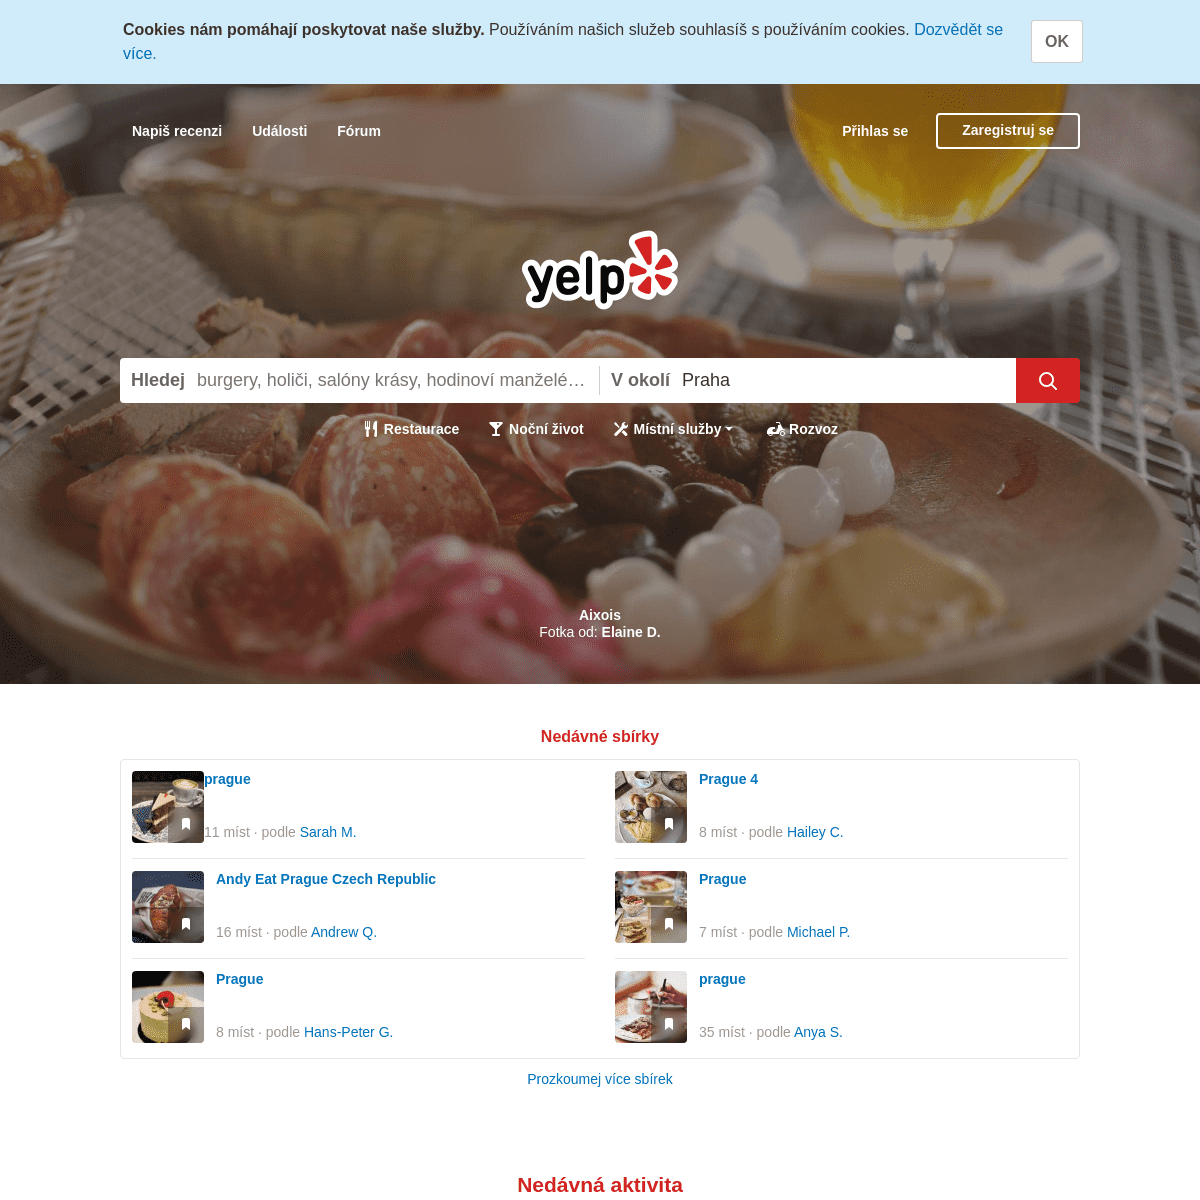 A complete backup of yelp.cz